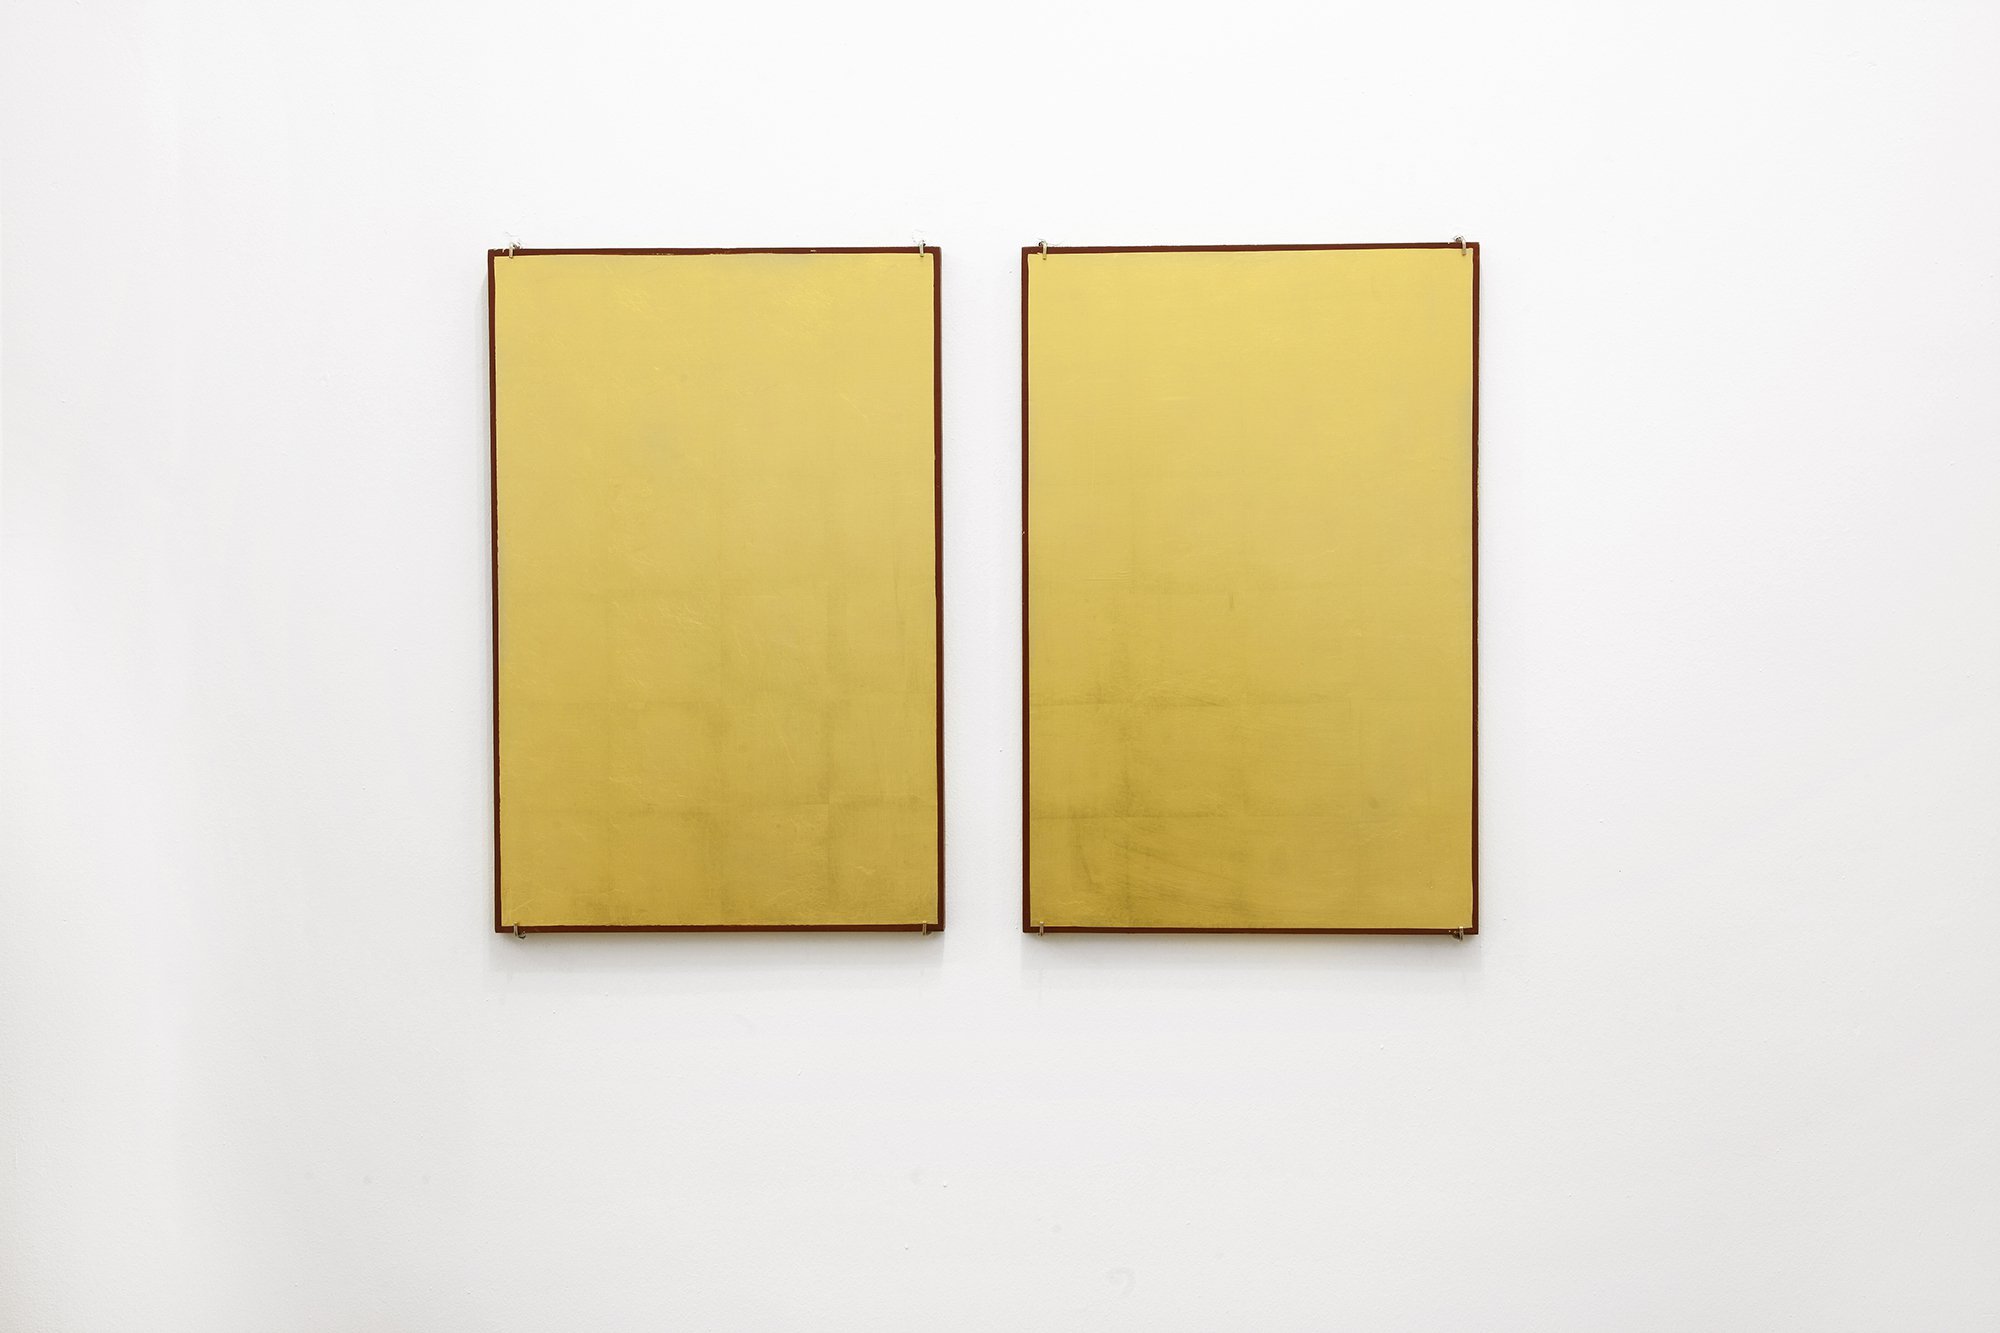 Christodoulos Panayiotou, Untitled, diptych, painting and gold on wood, 39 x 59 cm each (15 3/8 x 23 1/4 in each), 2012